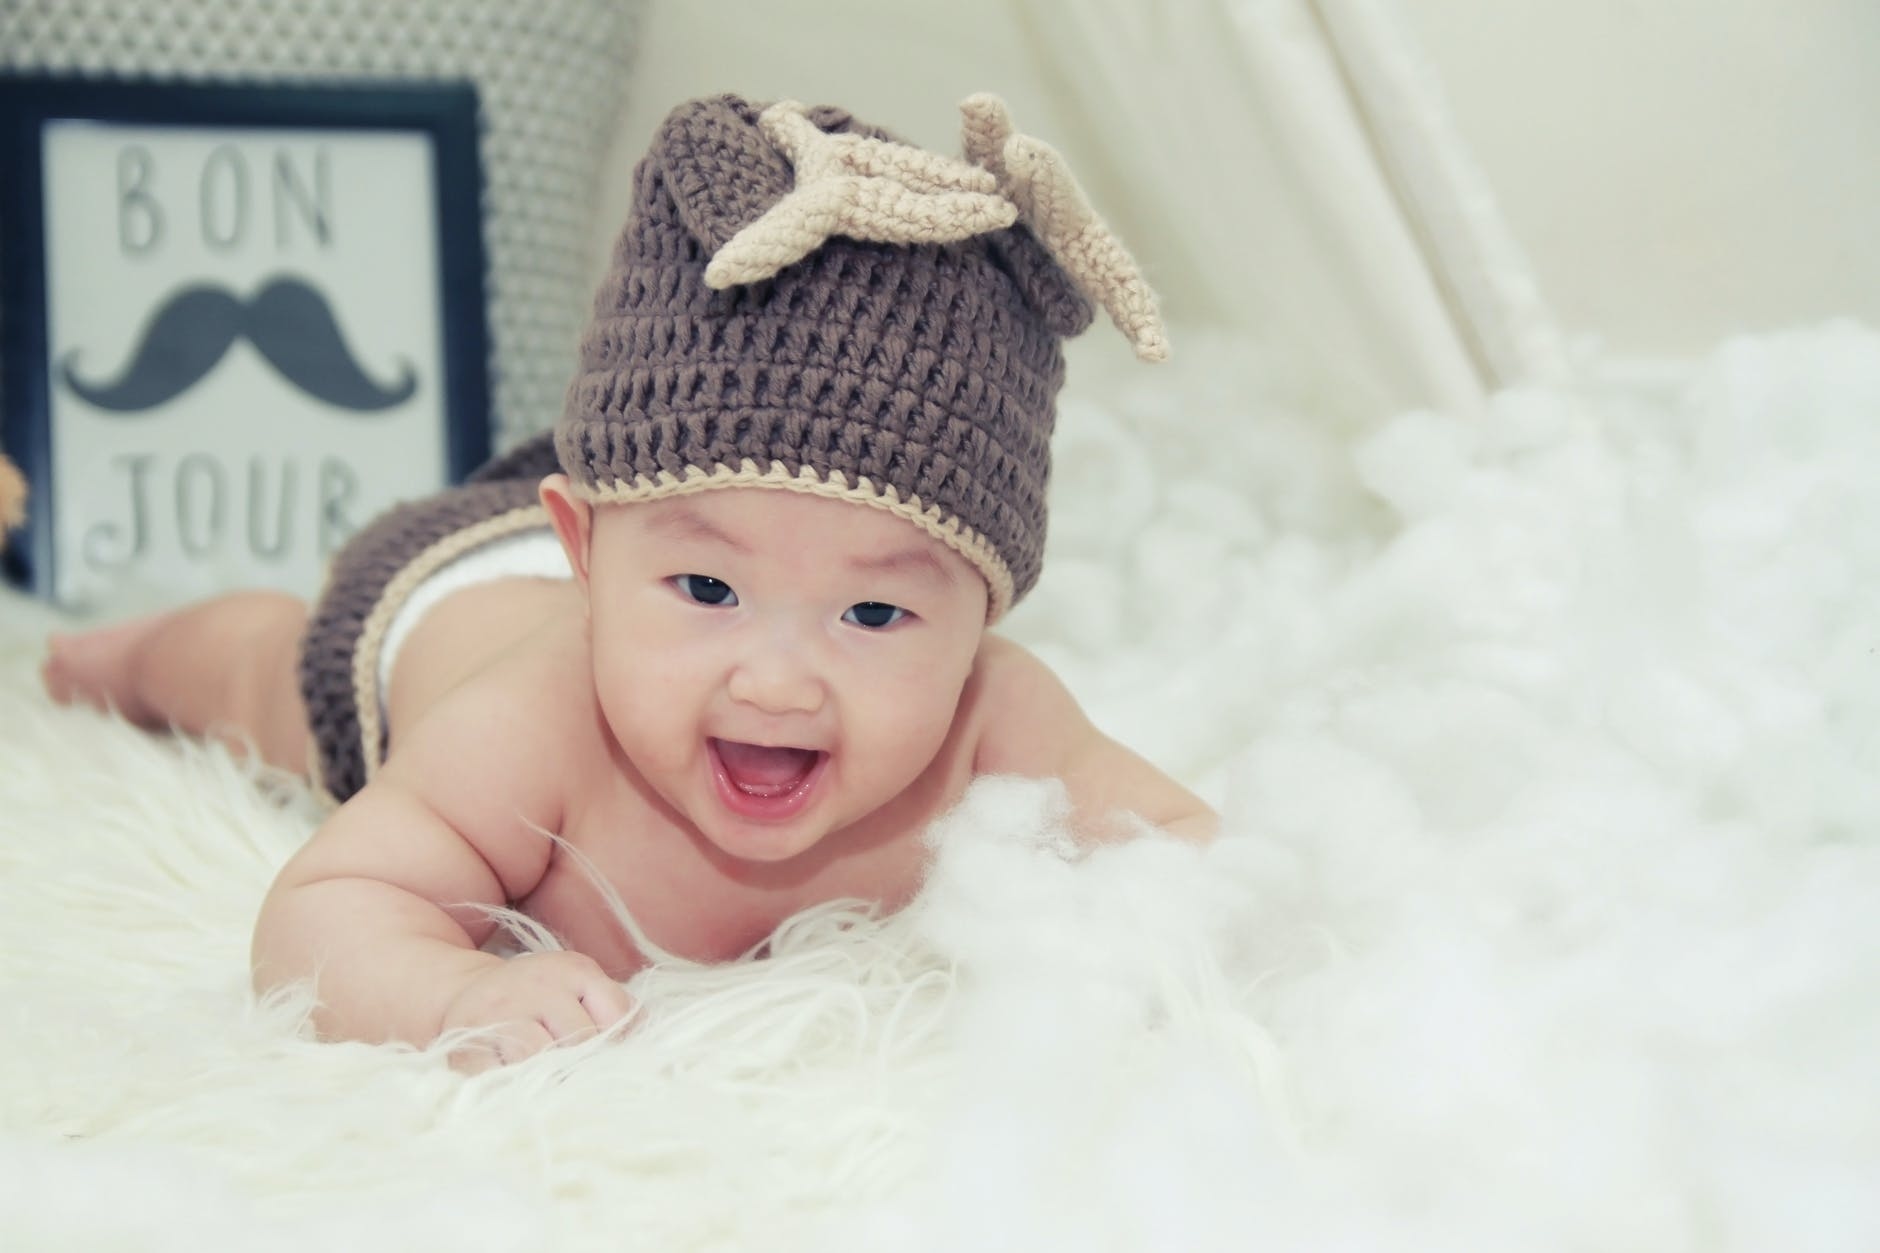 Laughing Baby in a hat